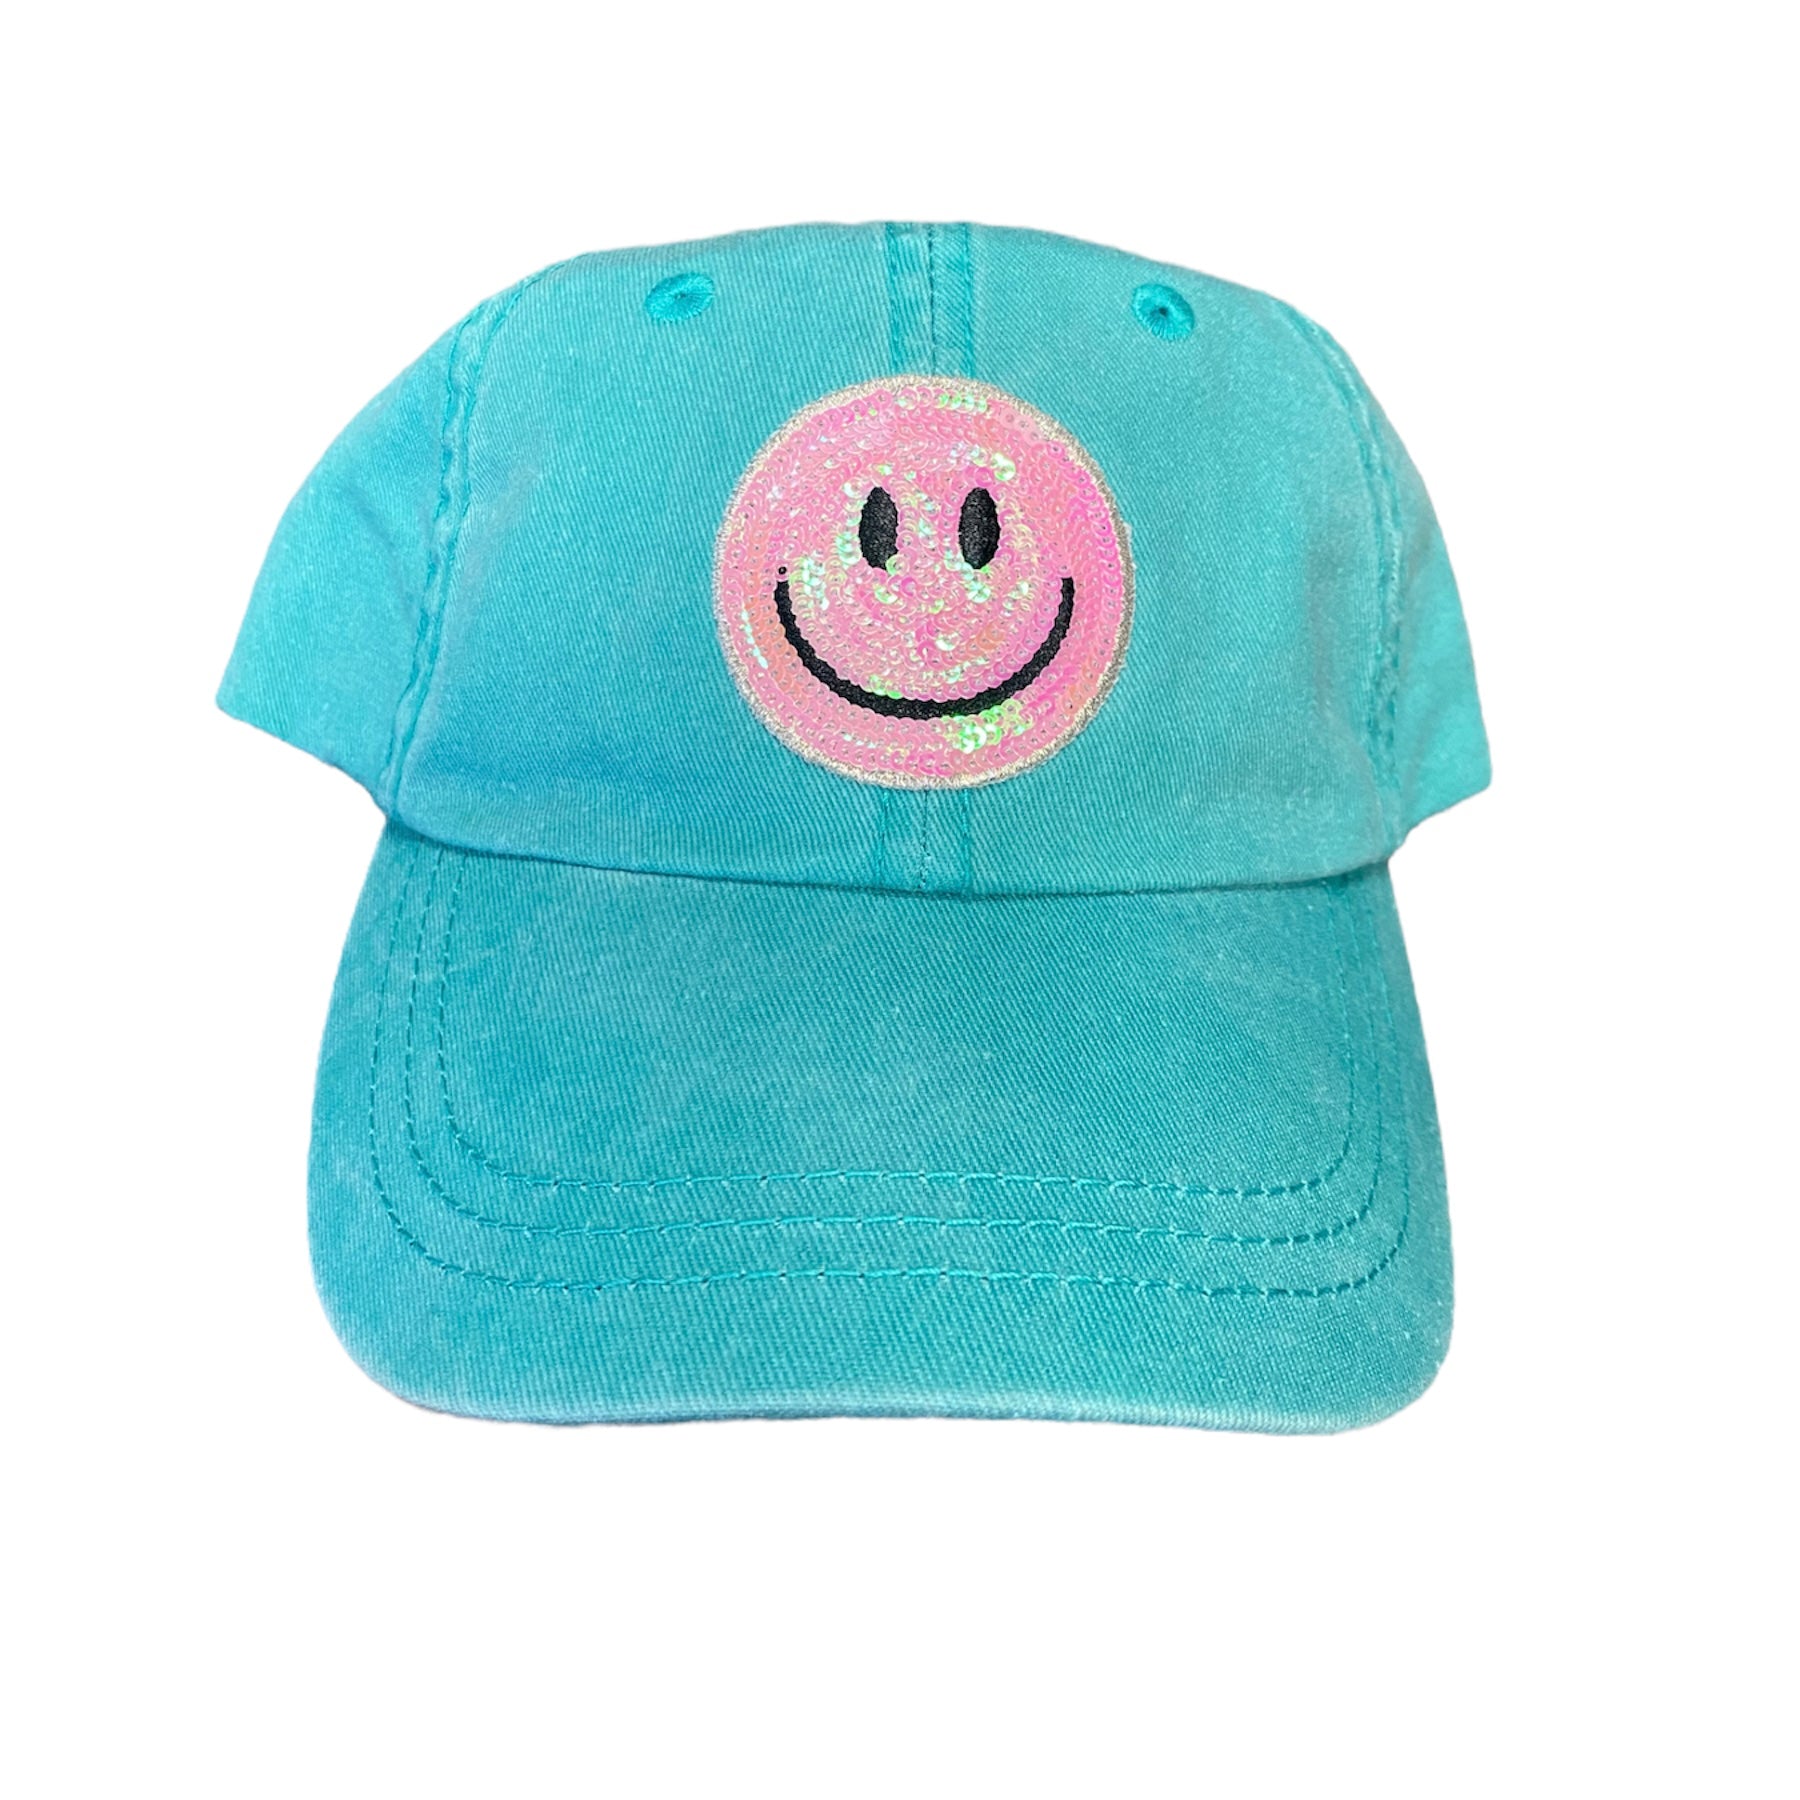 Sequin Smiley Face Hat